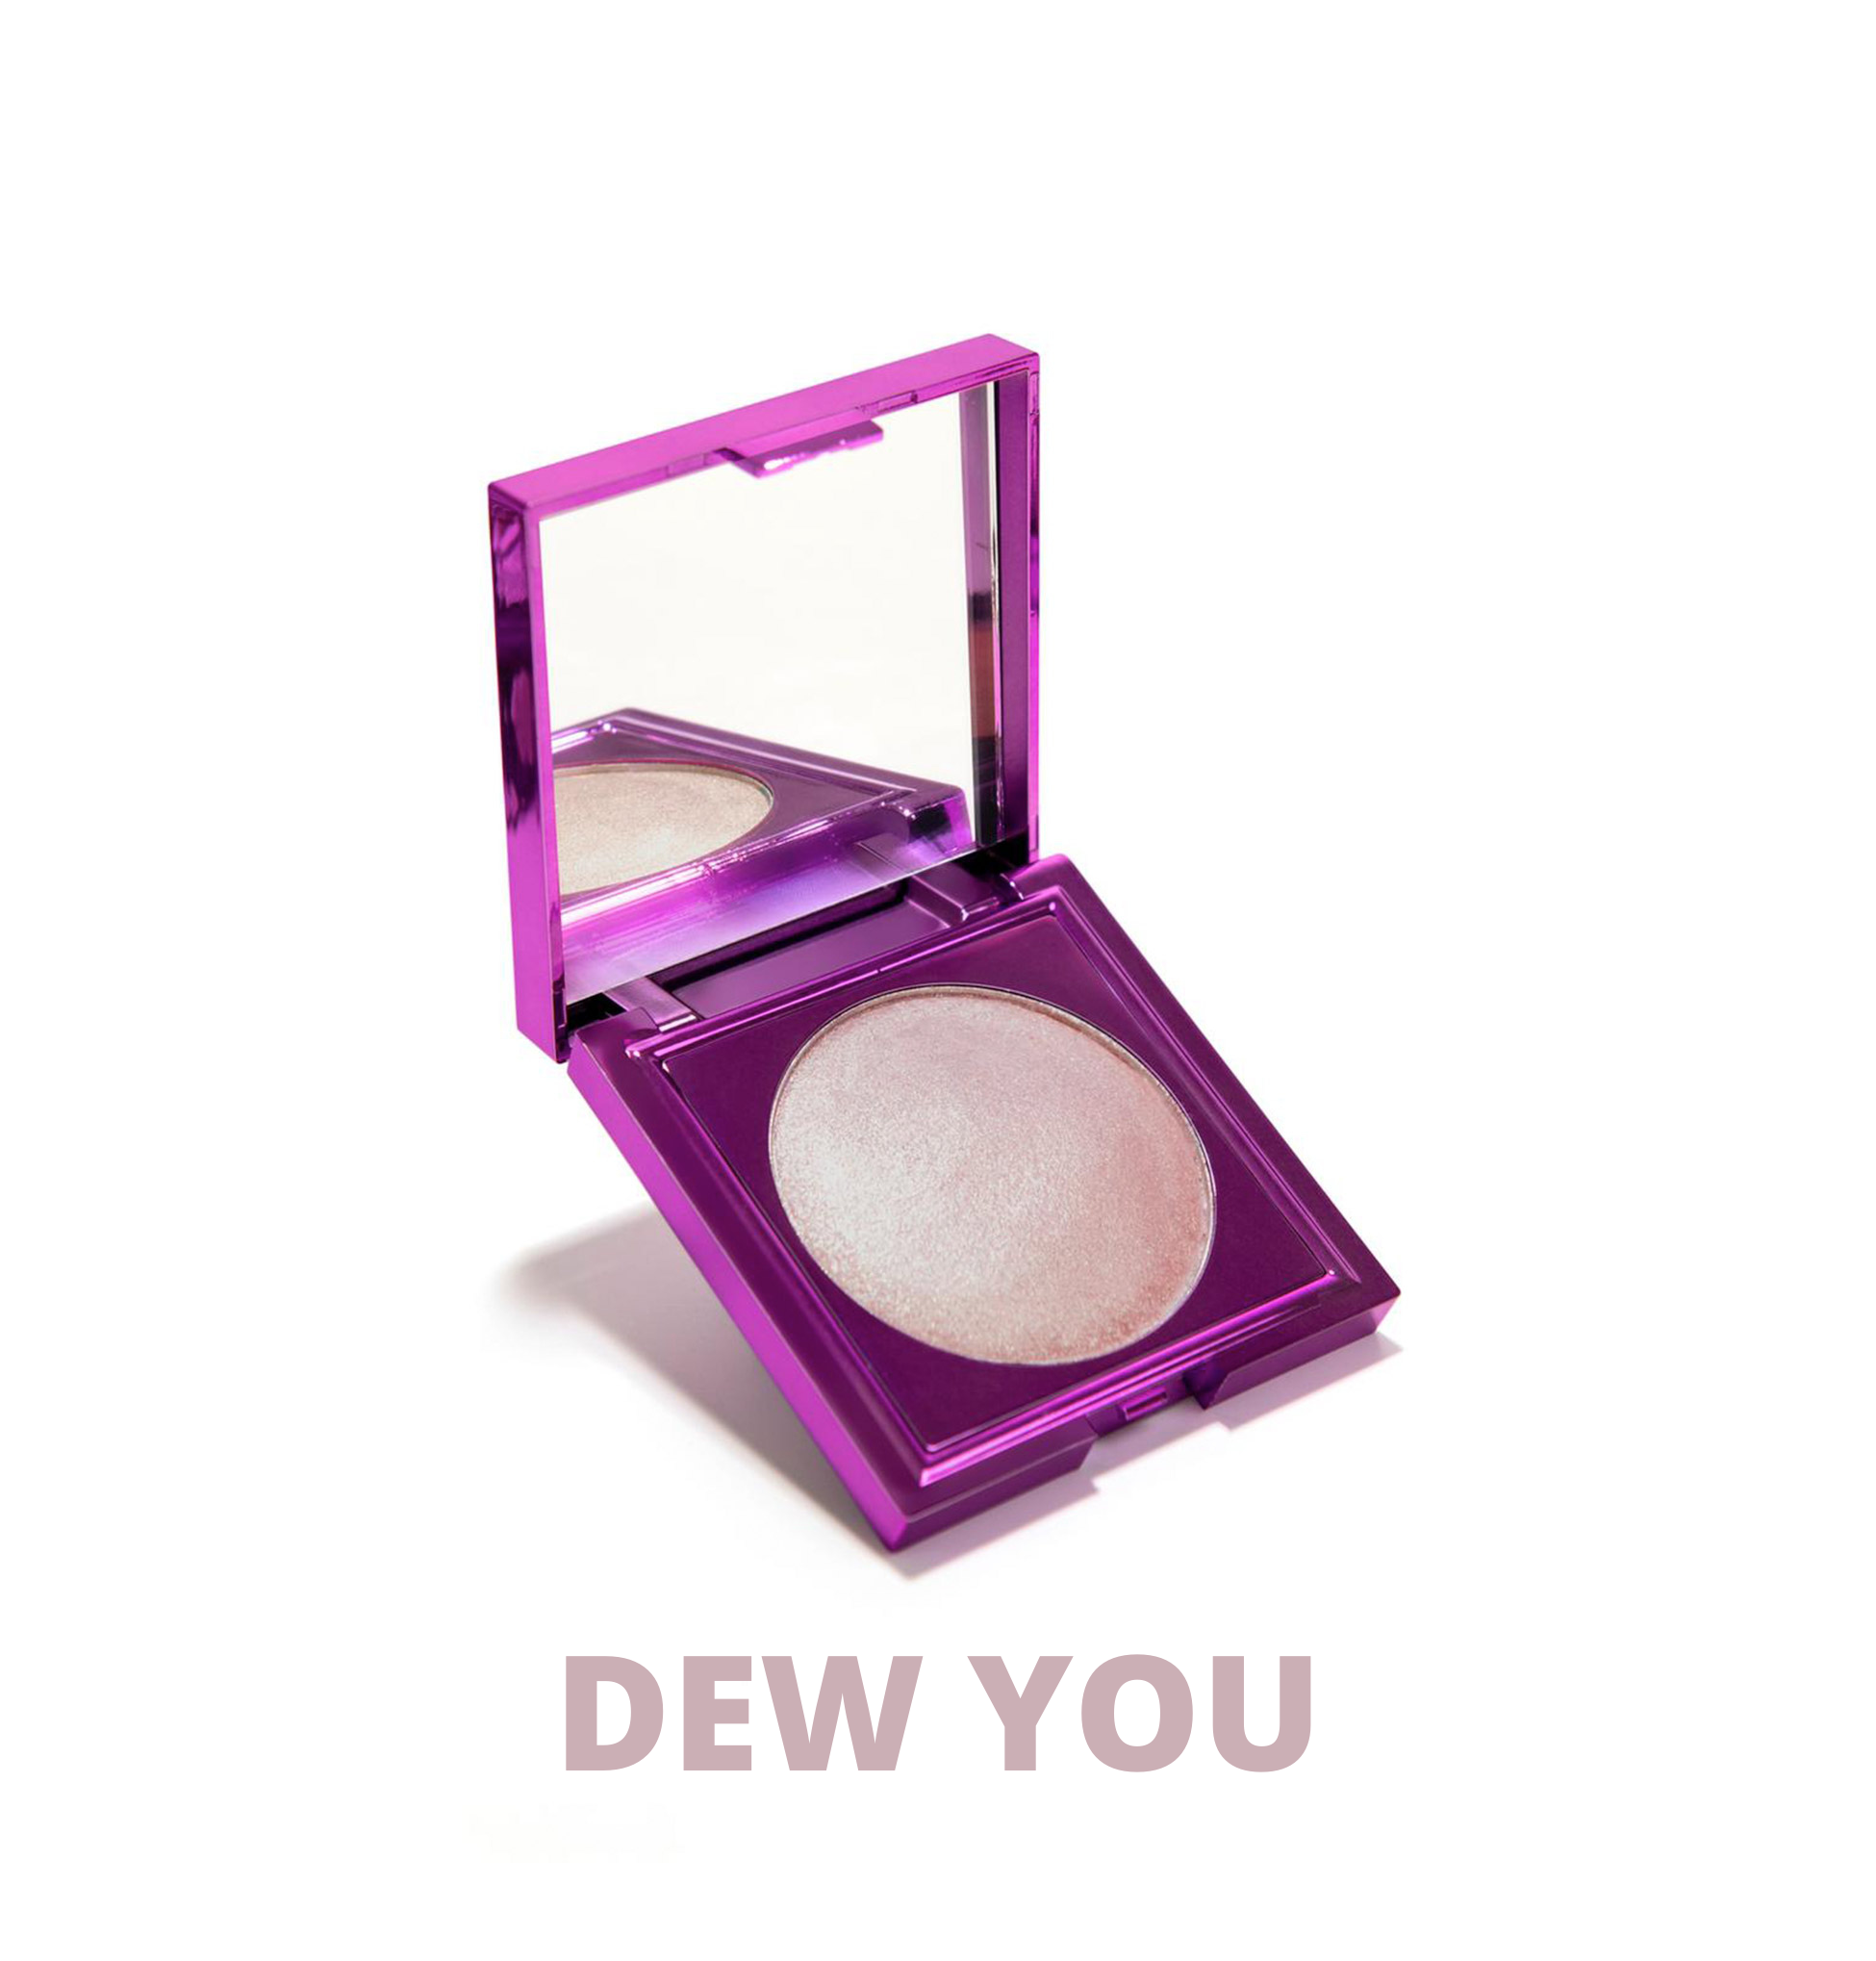 BPERFECT X STACEY MARIE – Get Wet Cream Highlighter in DEW YOU